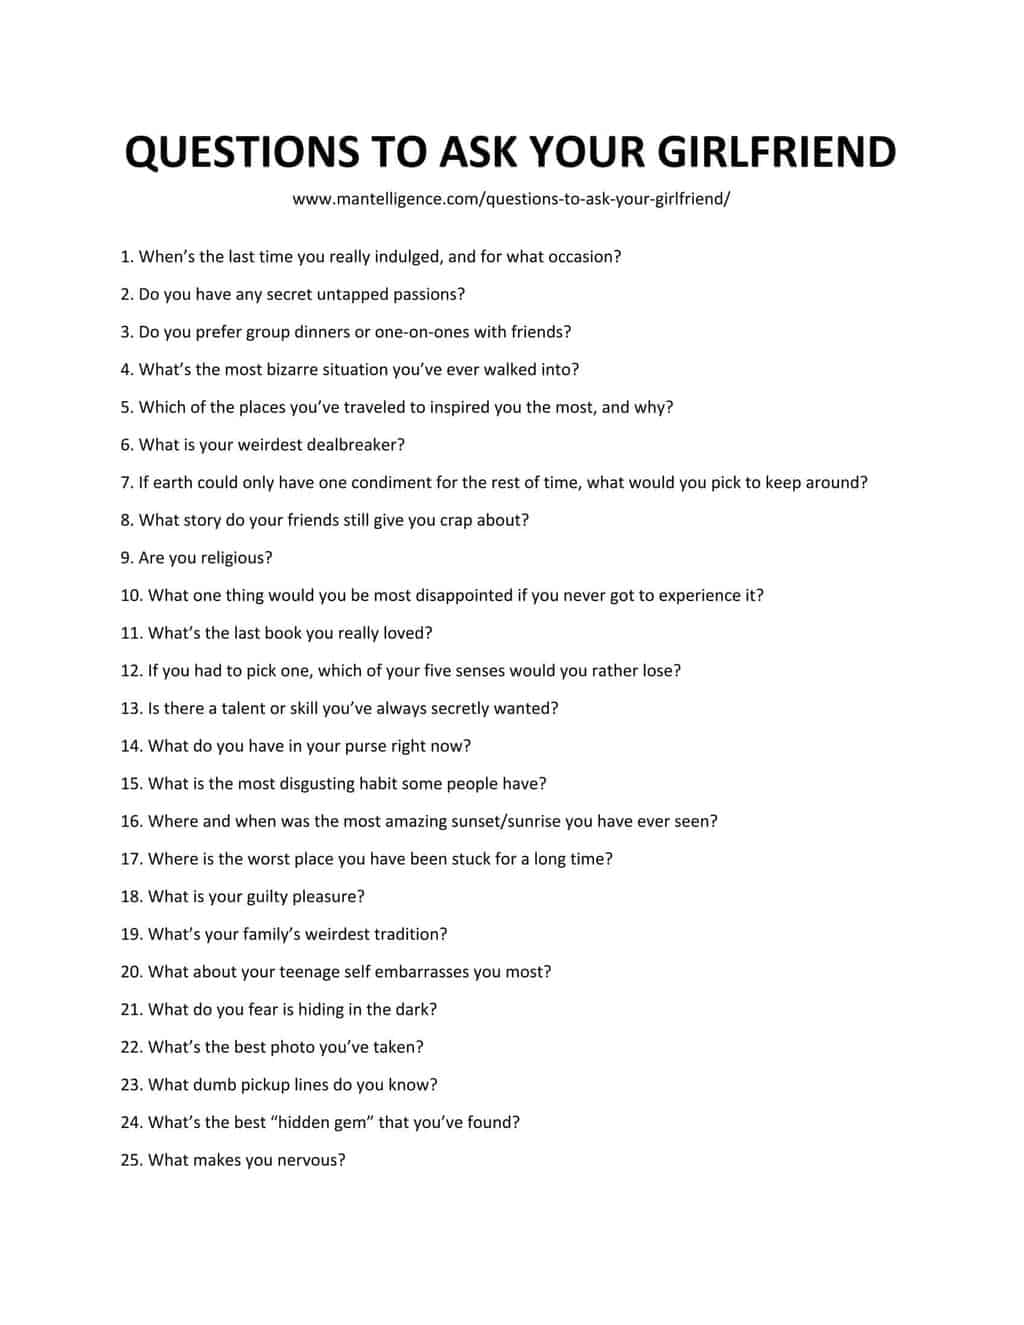 Questions to ask a girlfriend in a relationship south africa